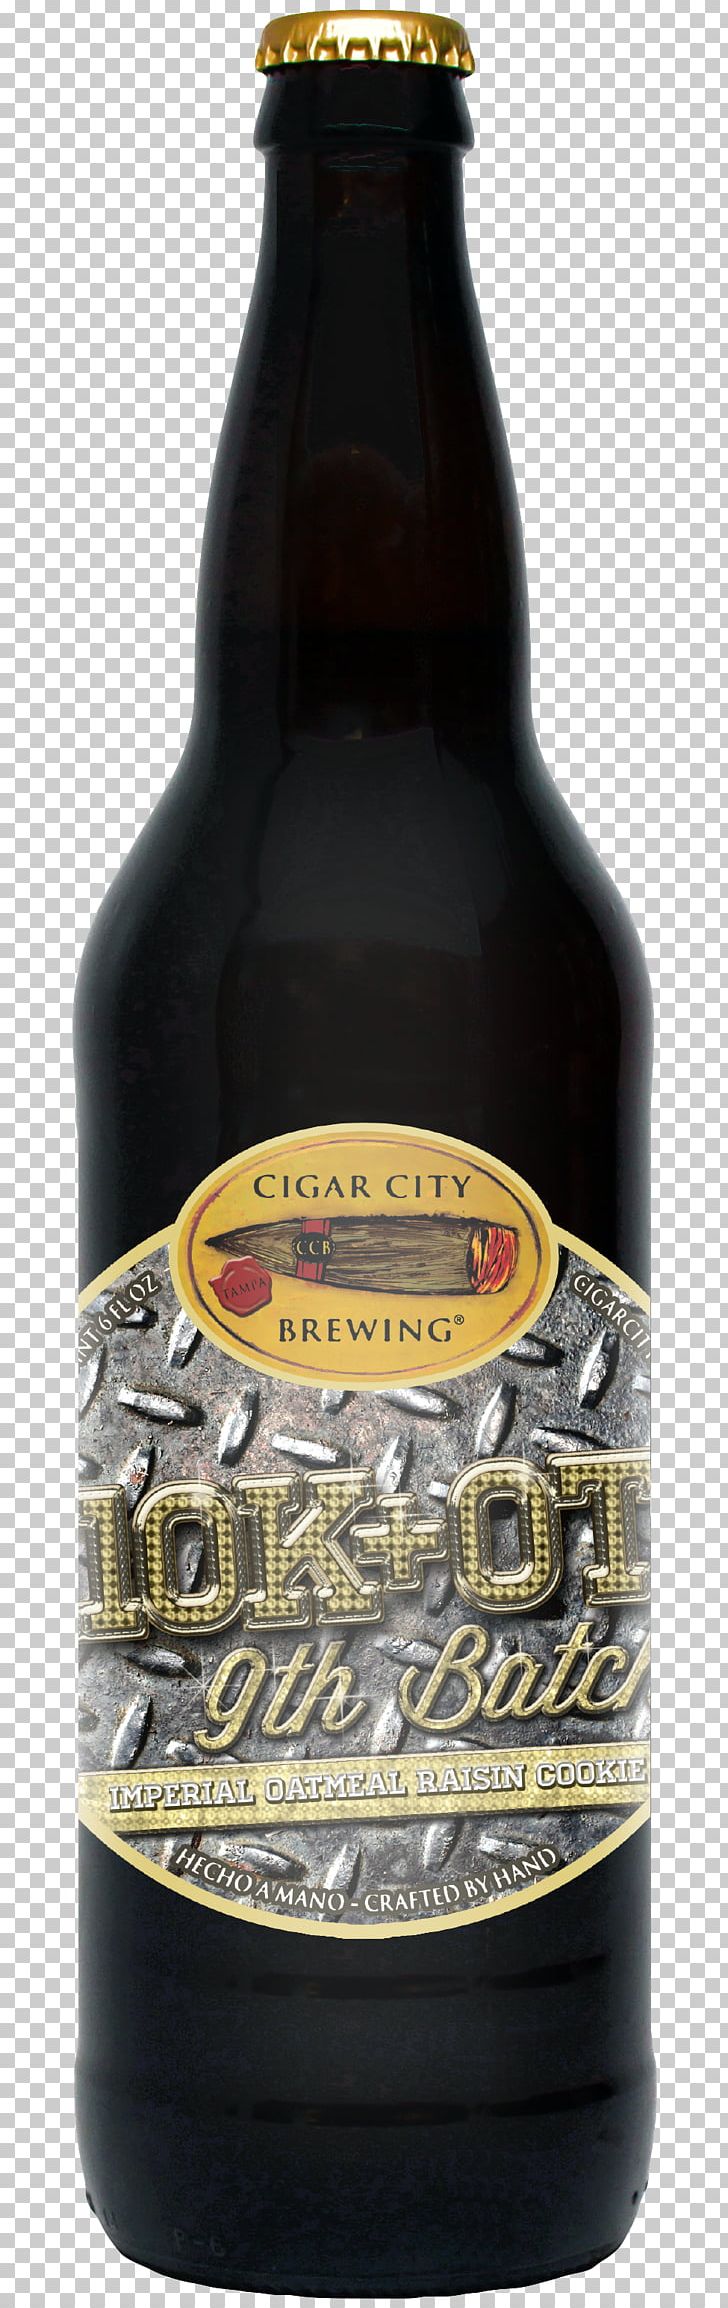 Ale Cigar City Brewing Company Beer Bottle Stout PNG, Clipart, Alcoholic Beverage, Ale, Beer, Beer Bottle, Beer Brewing Grains Malts Free PNG Download